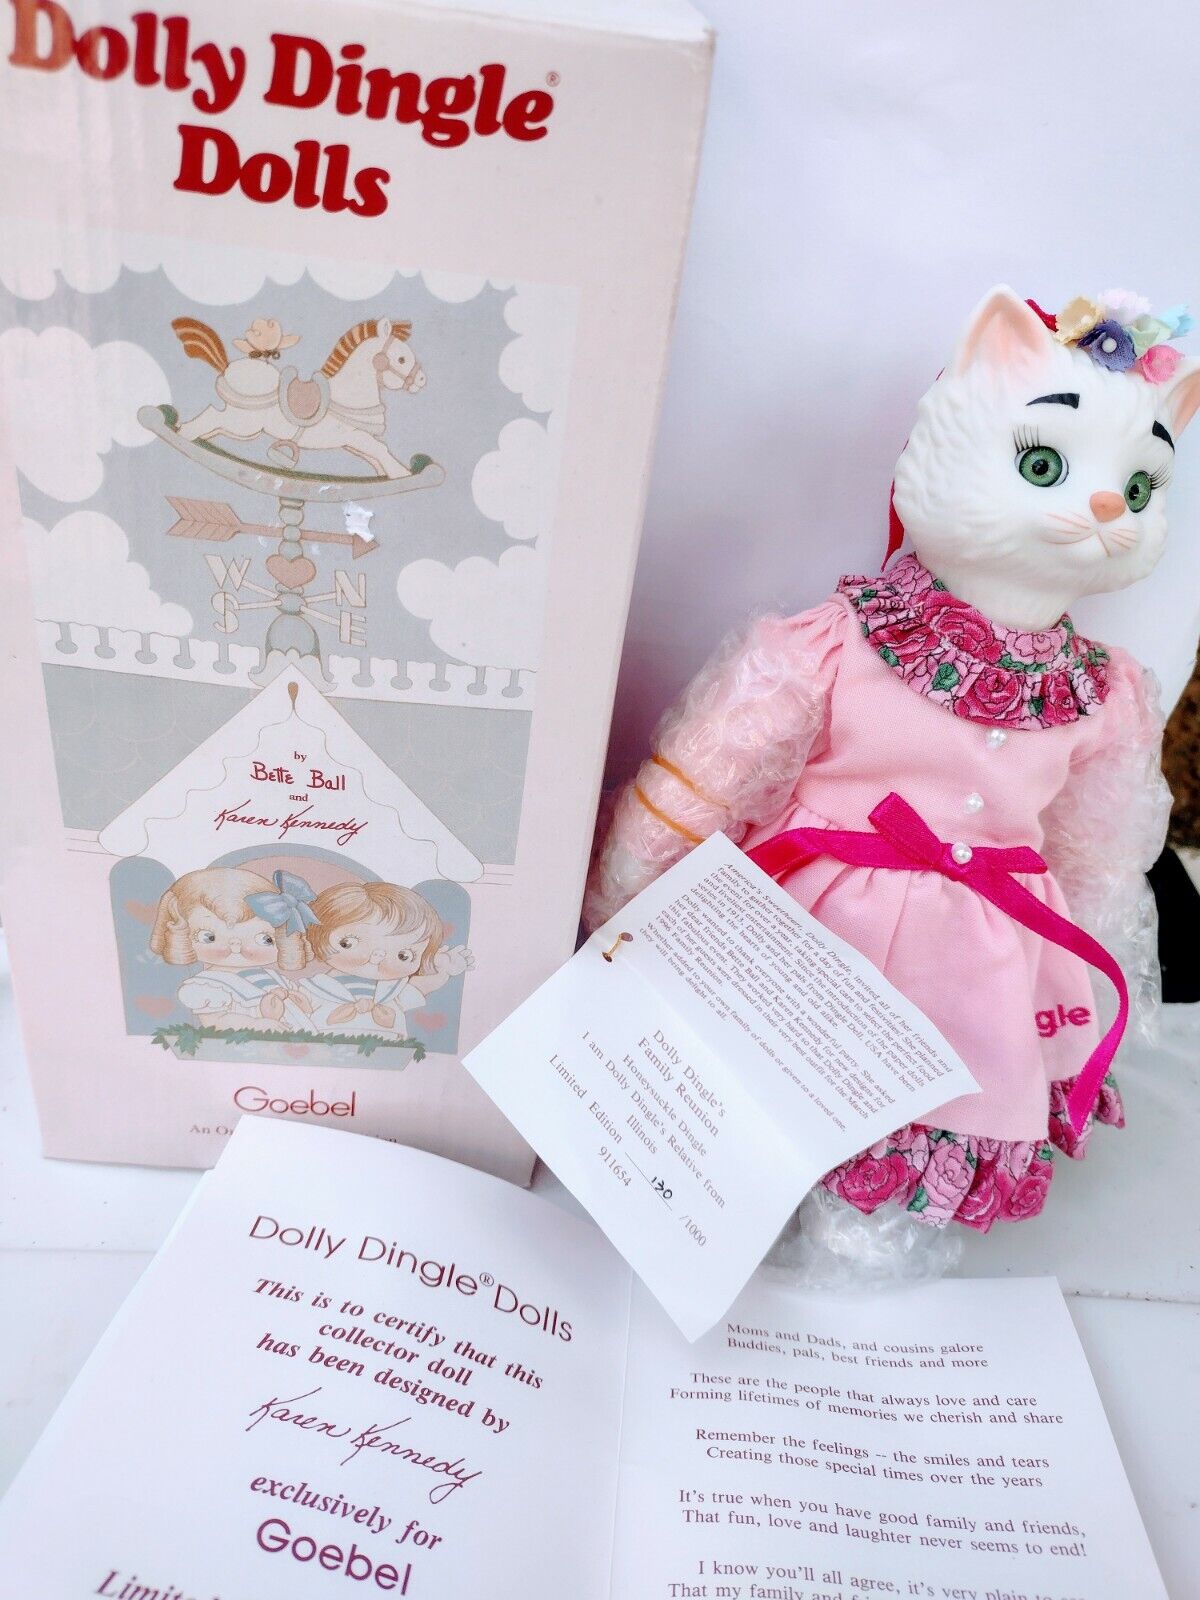 Honeysuckle Dolly Dingle Porcelain Cat Doll W/Stand Goebel In Box 8\